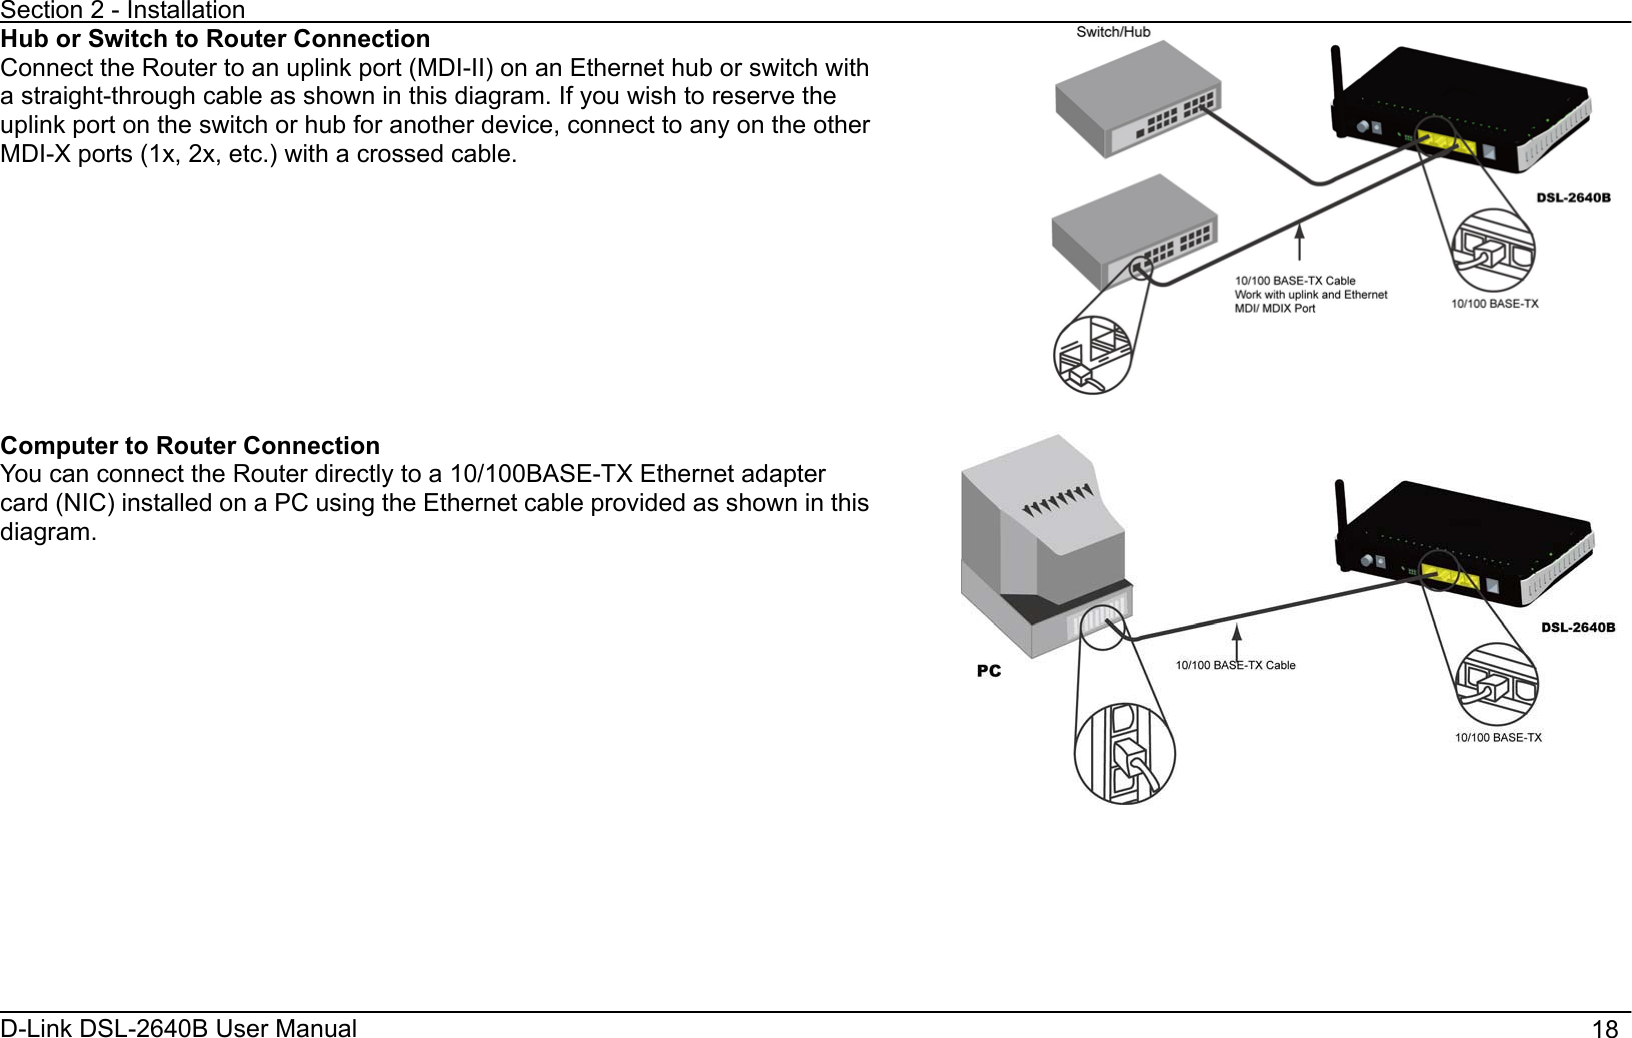 Section 2 - Installation D-Link DSL-2640B User Manual                                       18Hub or Switch to Router Connection Connect the Router to an uplink port (MDI-II) on an Ethernet hub or switch with a straight-through cable as shown in this diagram. If you wish to reserve the uplink port on the switch or hub for another device, connect to any on the other MDI-X ports (1x, 2x, etc.) with a crossed cable.Computer to Router Connection You can connect the Router directly to a 10/100BASE-TX Ethernet adapter card (NIC) installed on a PC using the Ethernet cable provided as shown in this diagram.